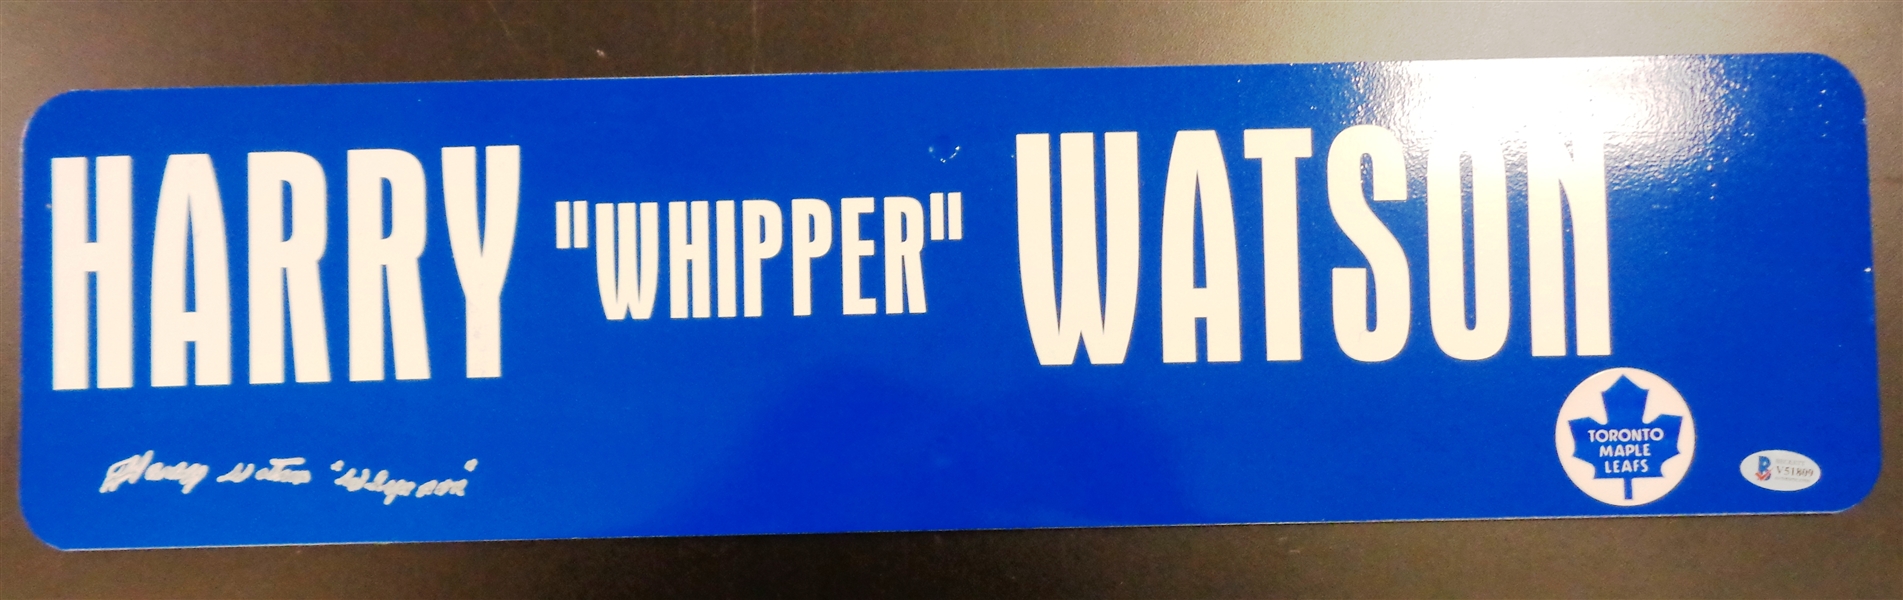 Harry "Whipper" Watson Autographed 6x24 Metal Street Sign